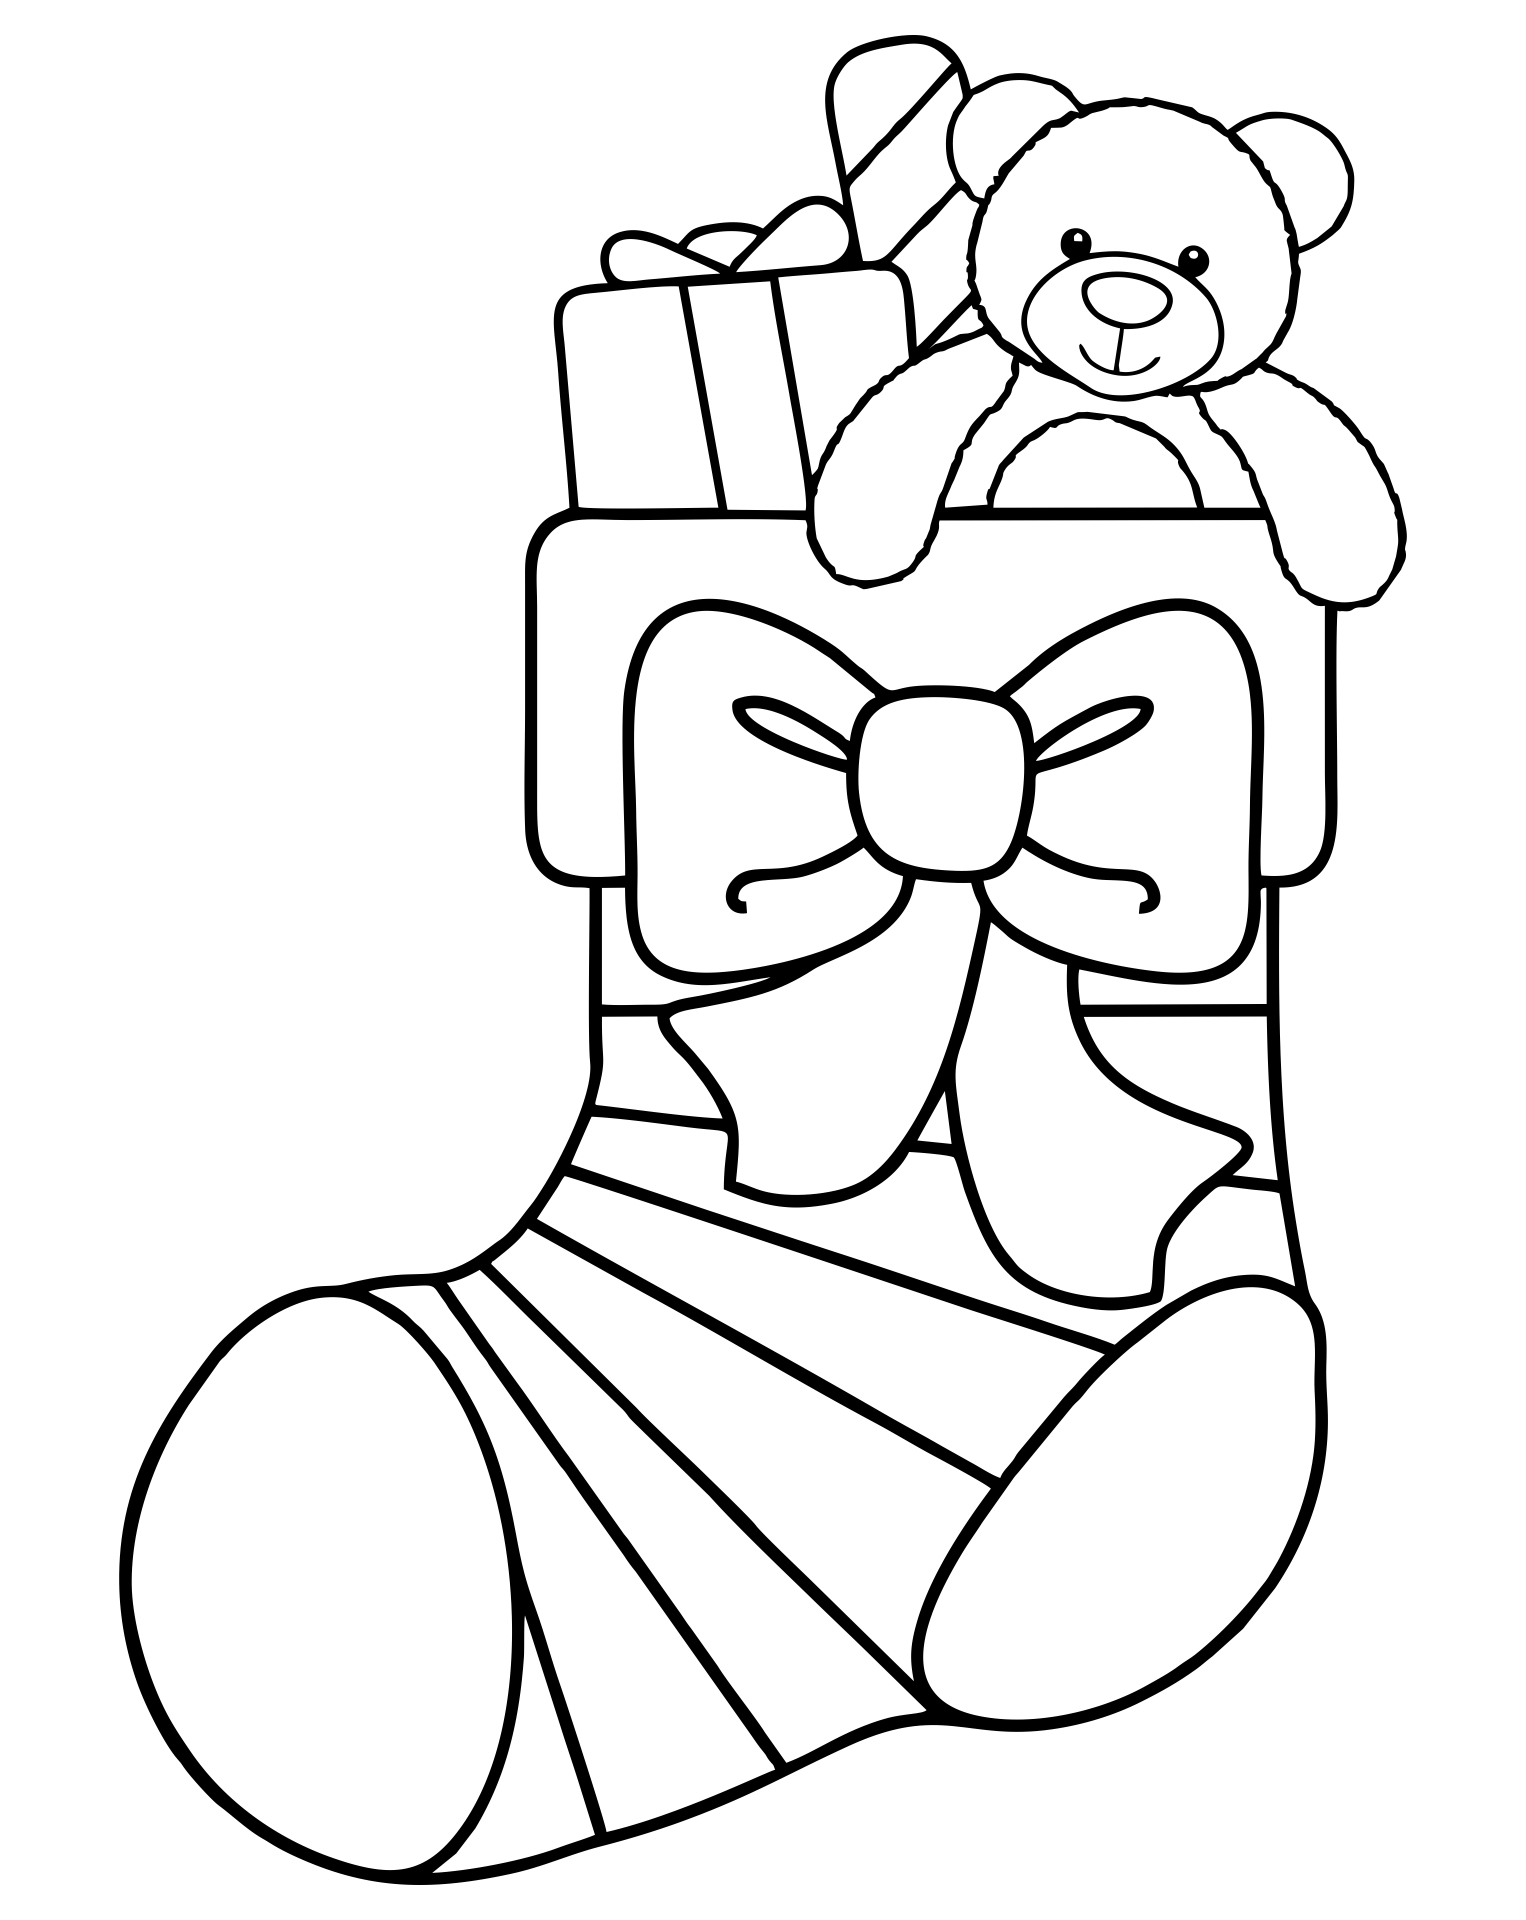 Stocking Christmas Ornament Coloring Pages